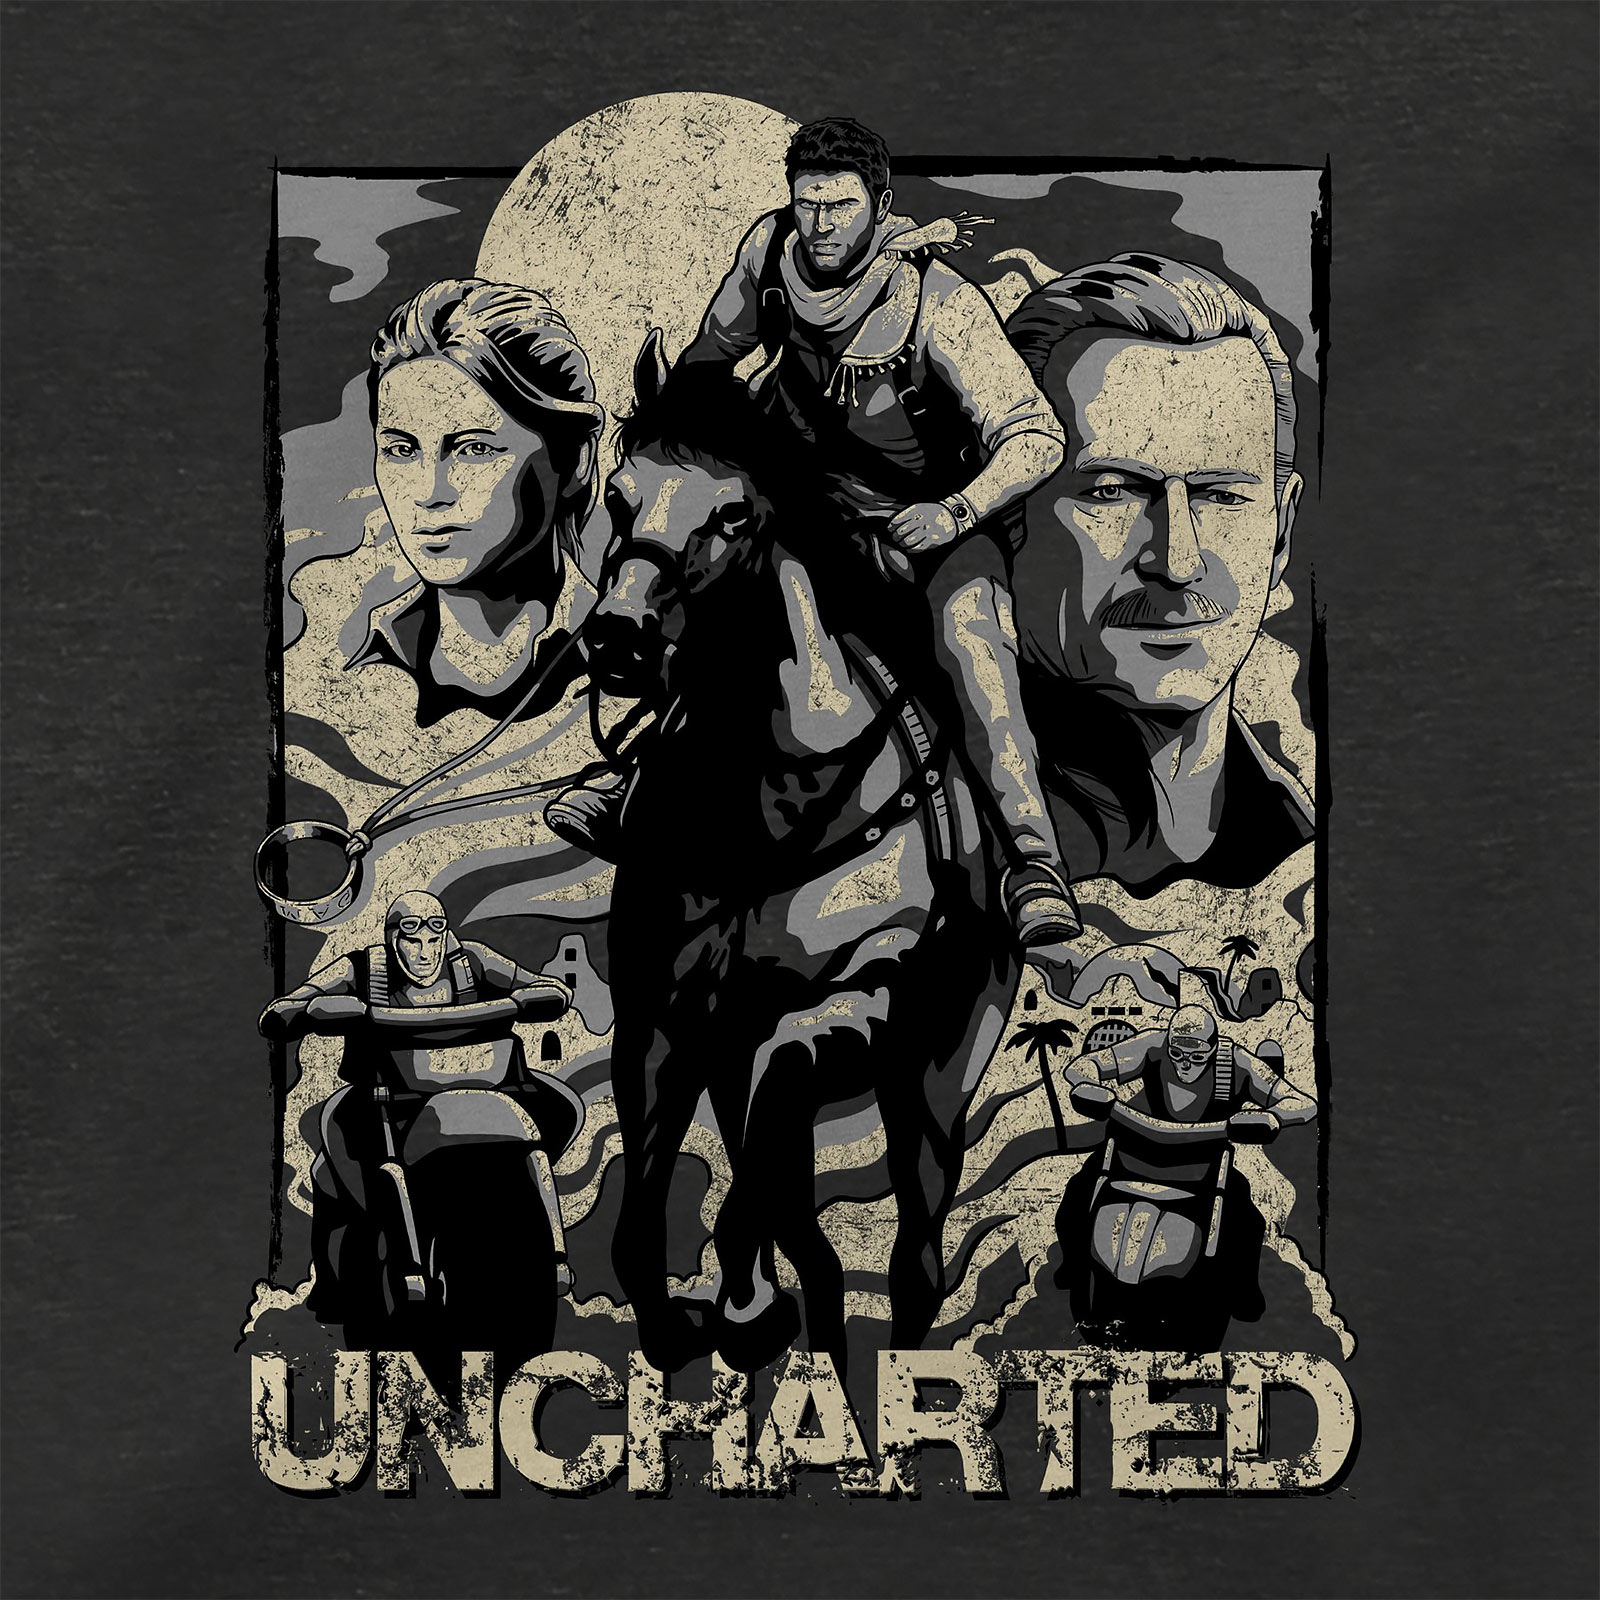 Uncharted - Cover Page T-Shirt grijs